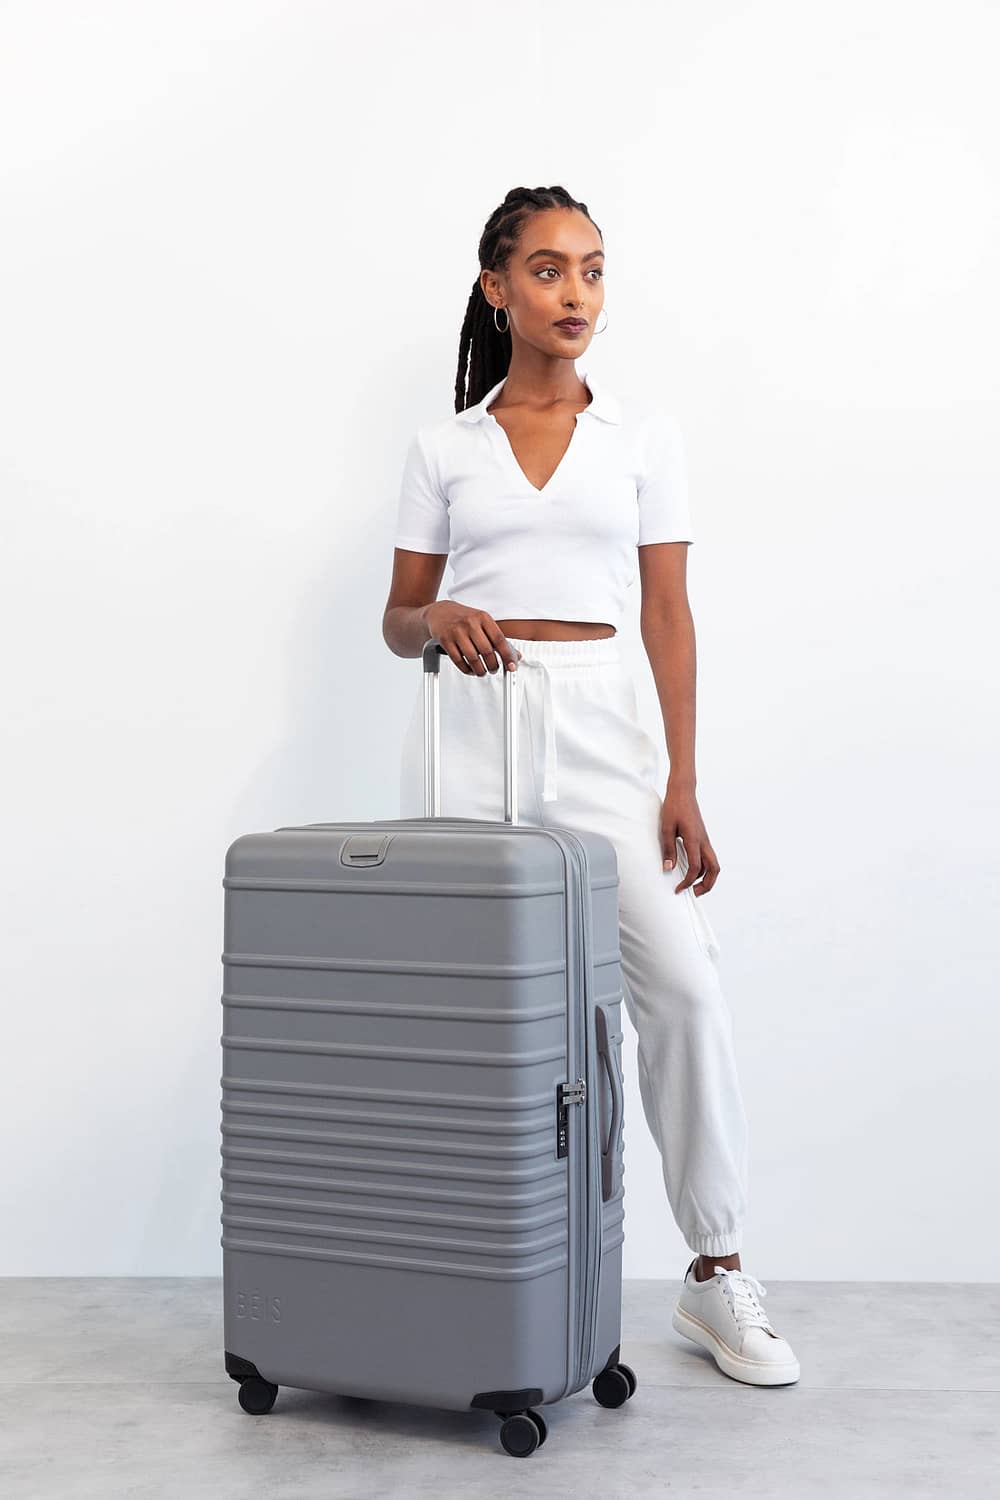 Best Check-In Luggage for Women